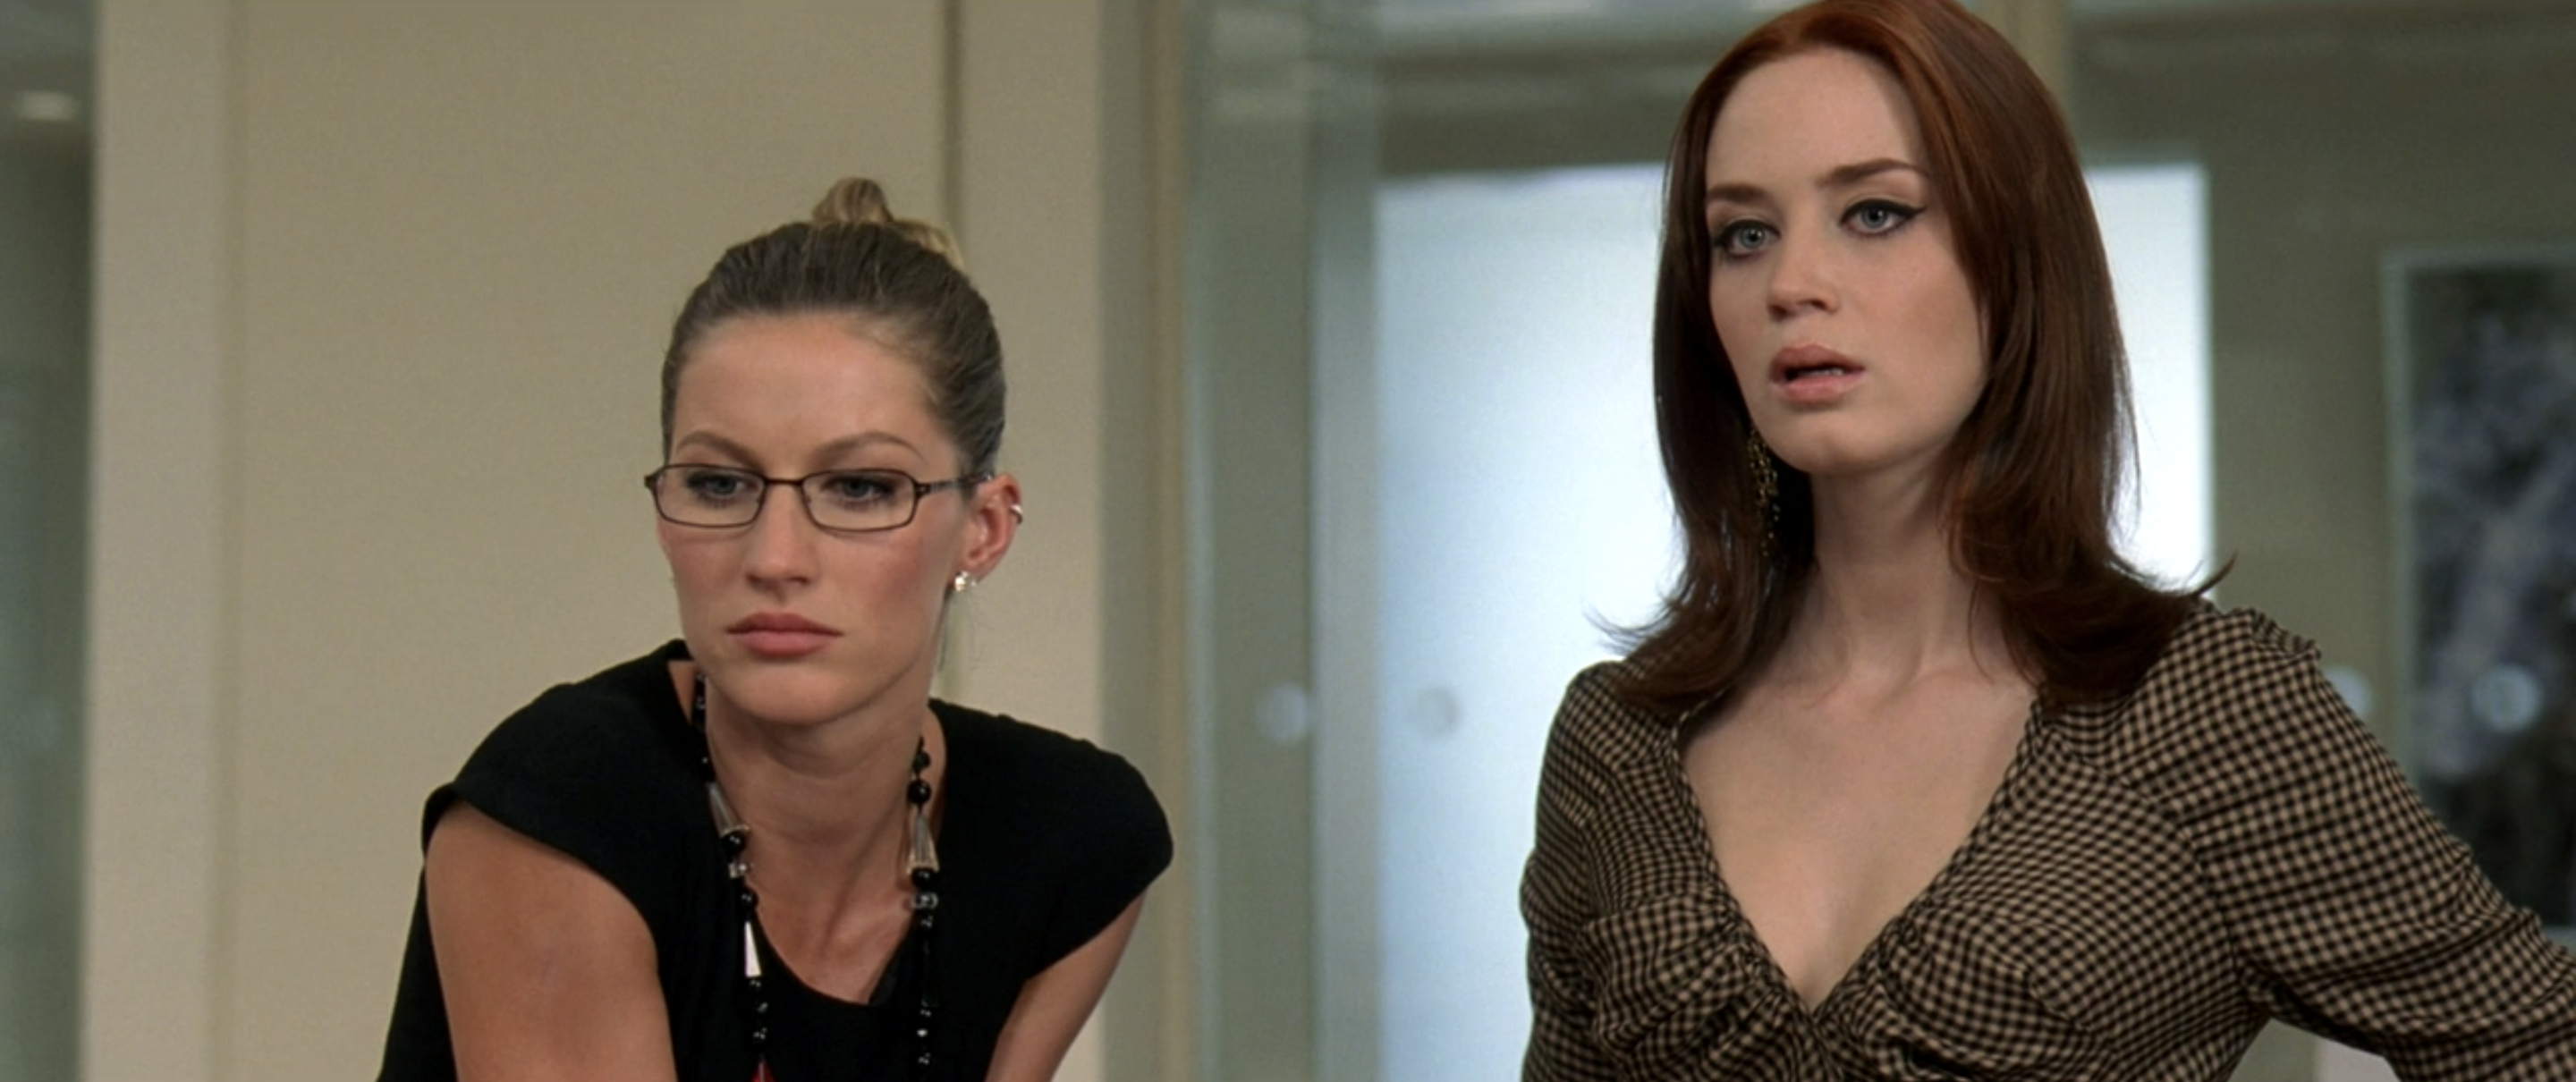 Gisele Bündchen as Serena and Emily Blunt as Emily in "The Devil Wears Prada."